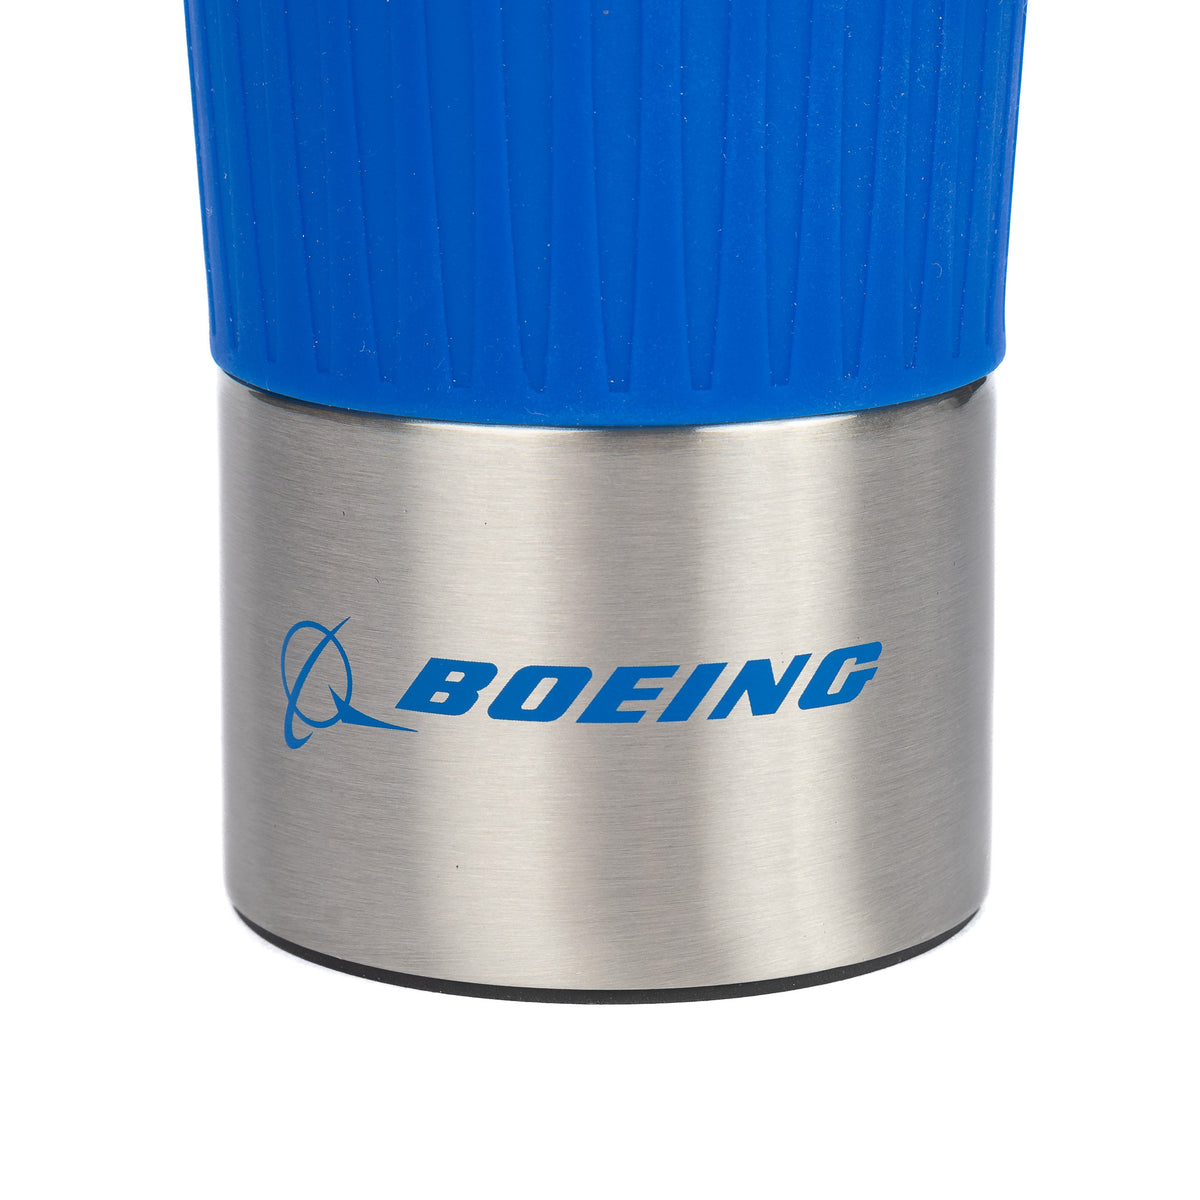 Boeing Royal Tumbler With Handle